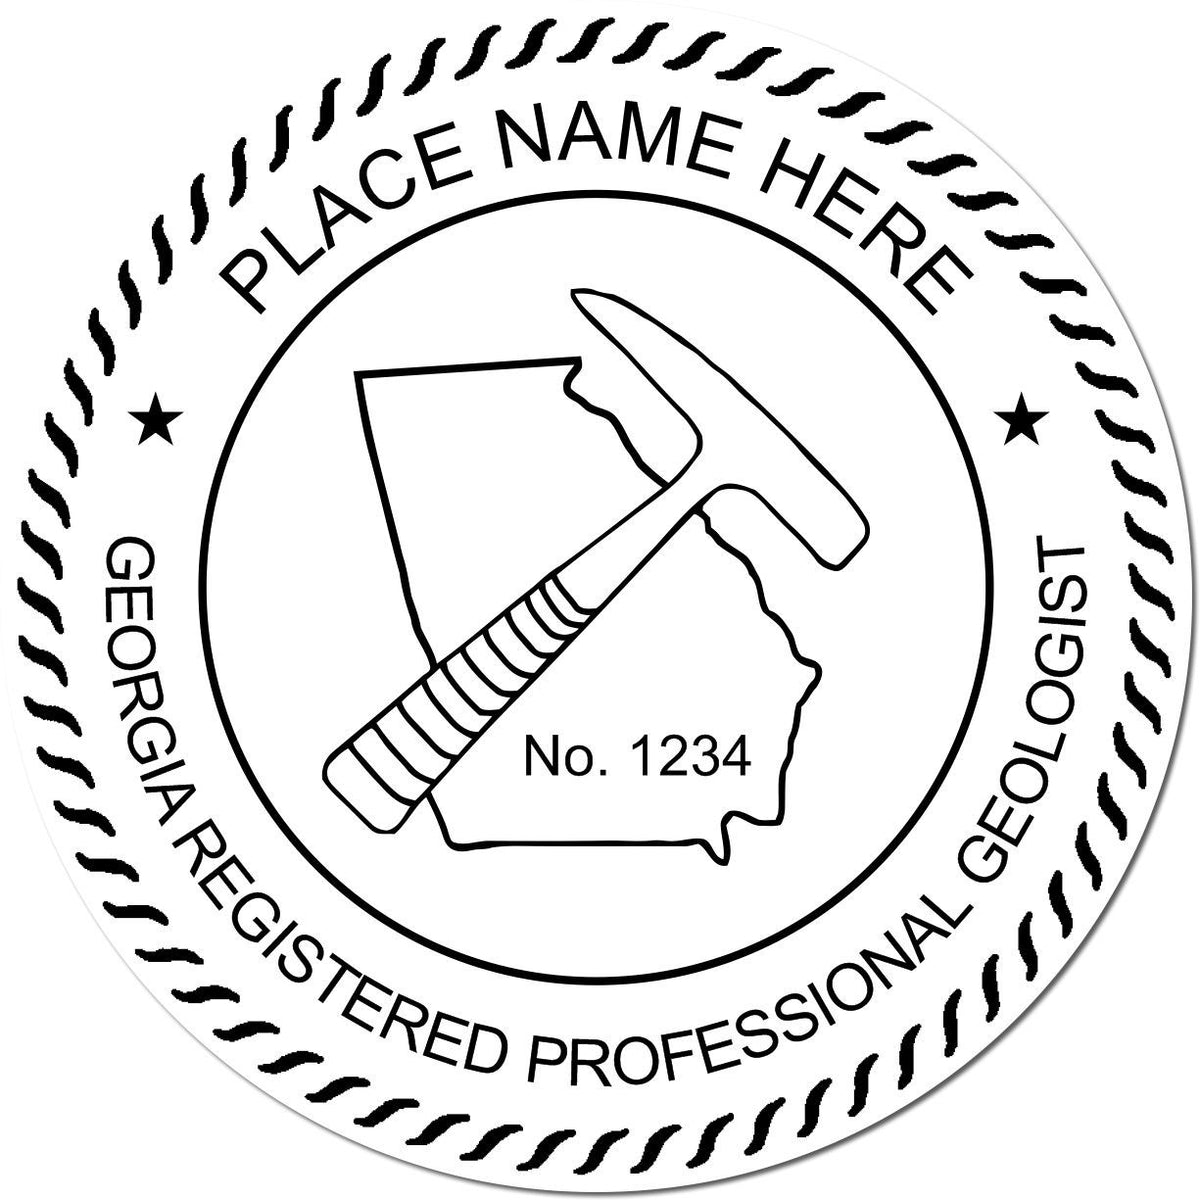 This paper is stamped with a sample imprint of the Digital Georgia Geologist Stamp, Electronic Seal for Georgia Geologist, signifying its quality and reliability.